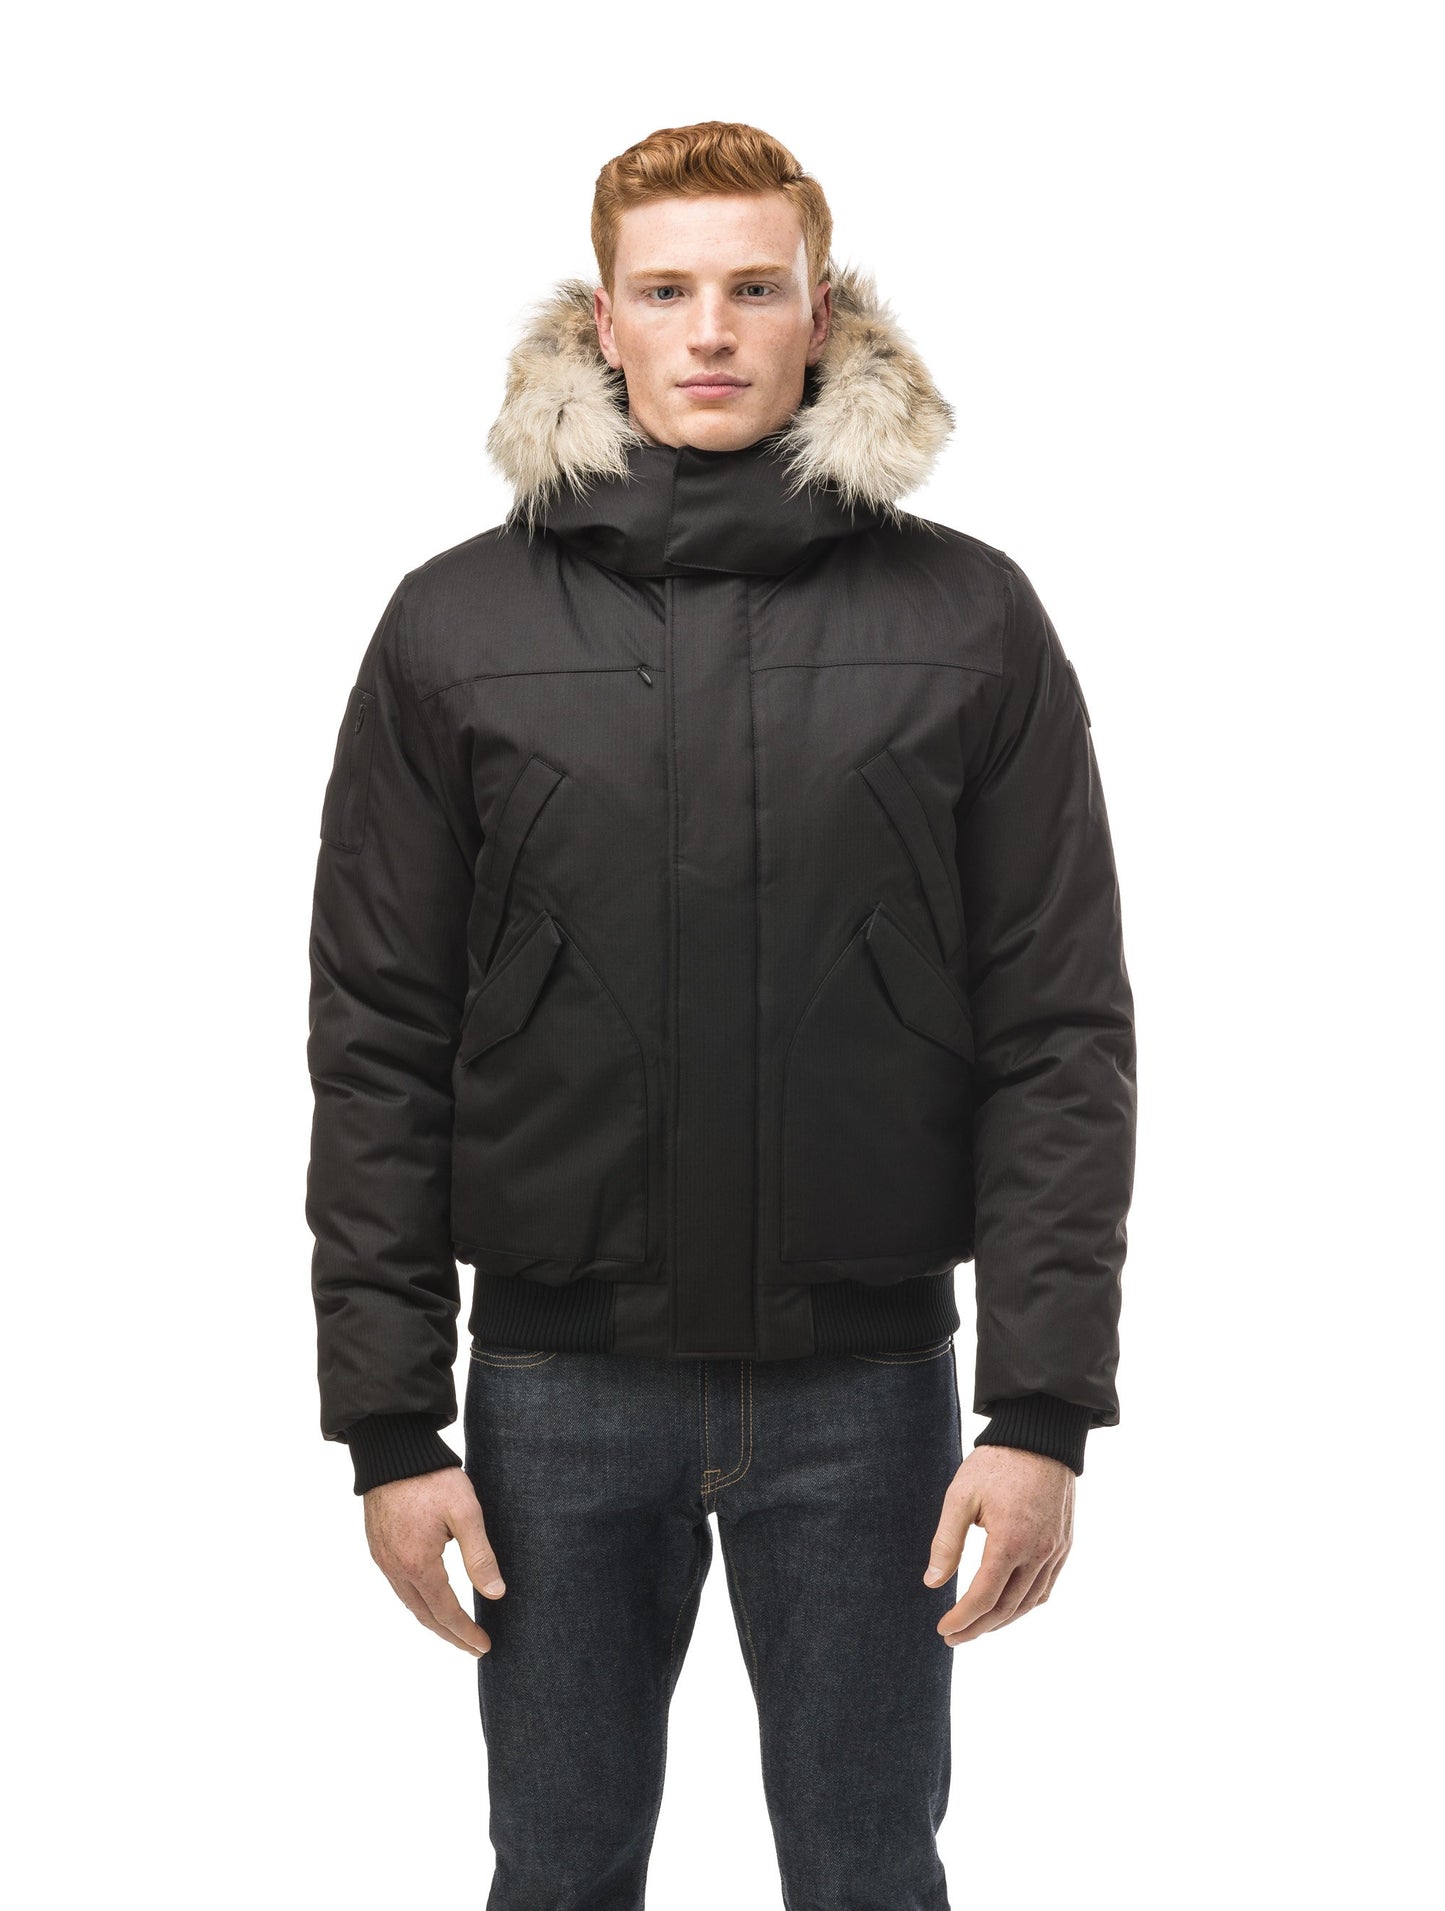 Men's classic down filled bomber jacket with a down filledÃ‚Â hood that features a removable coyote fur trim and concealed moldable framing wire in Black